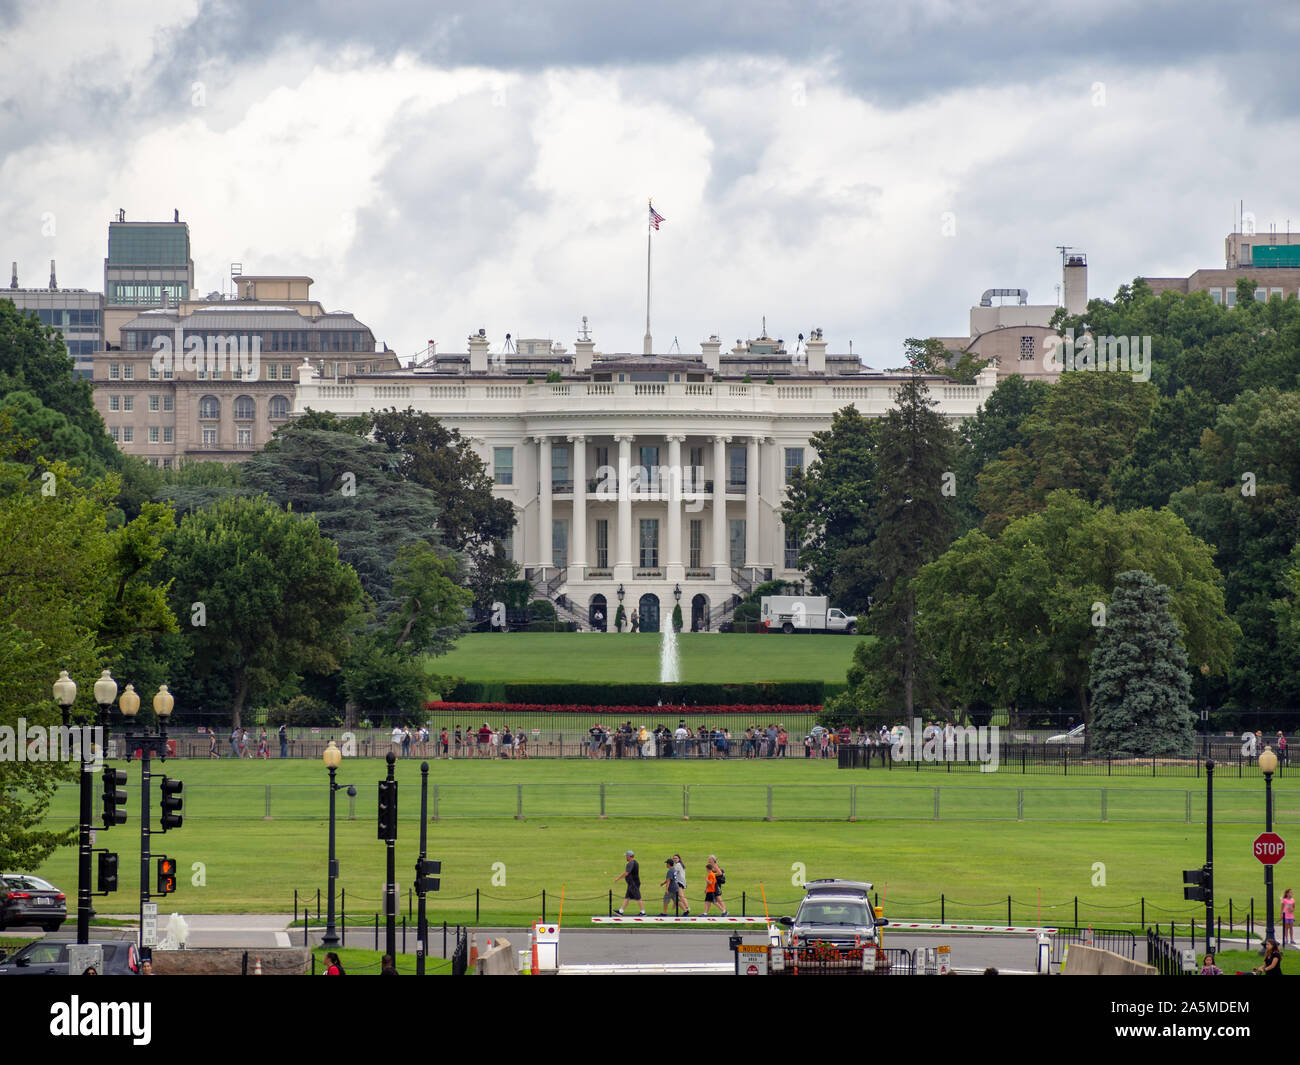 Washington DC, District of Columbia, Summer 2018 [United States US White House, lawn and garden behind the fence, touritst visitors in the street] Stock Photo